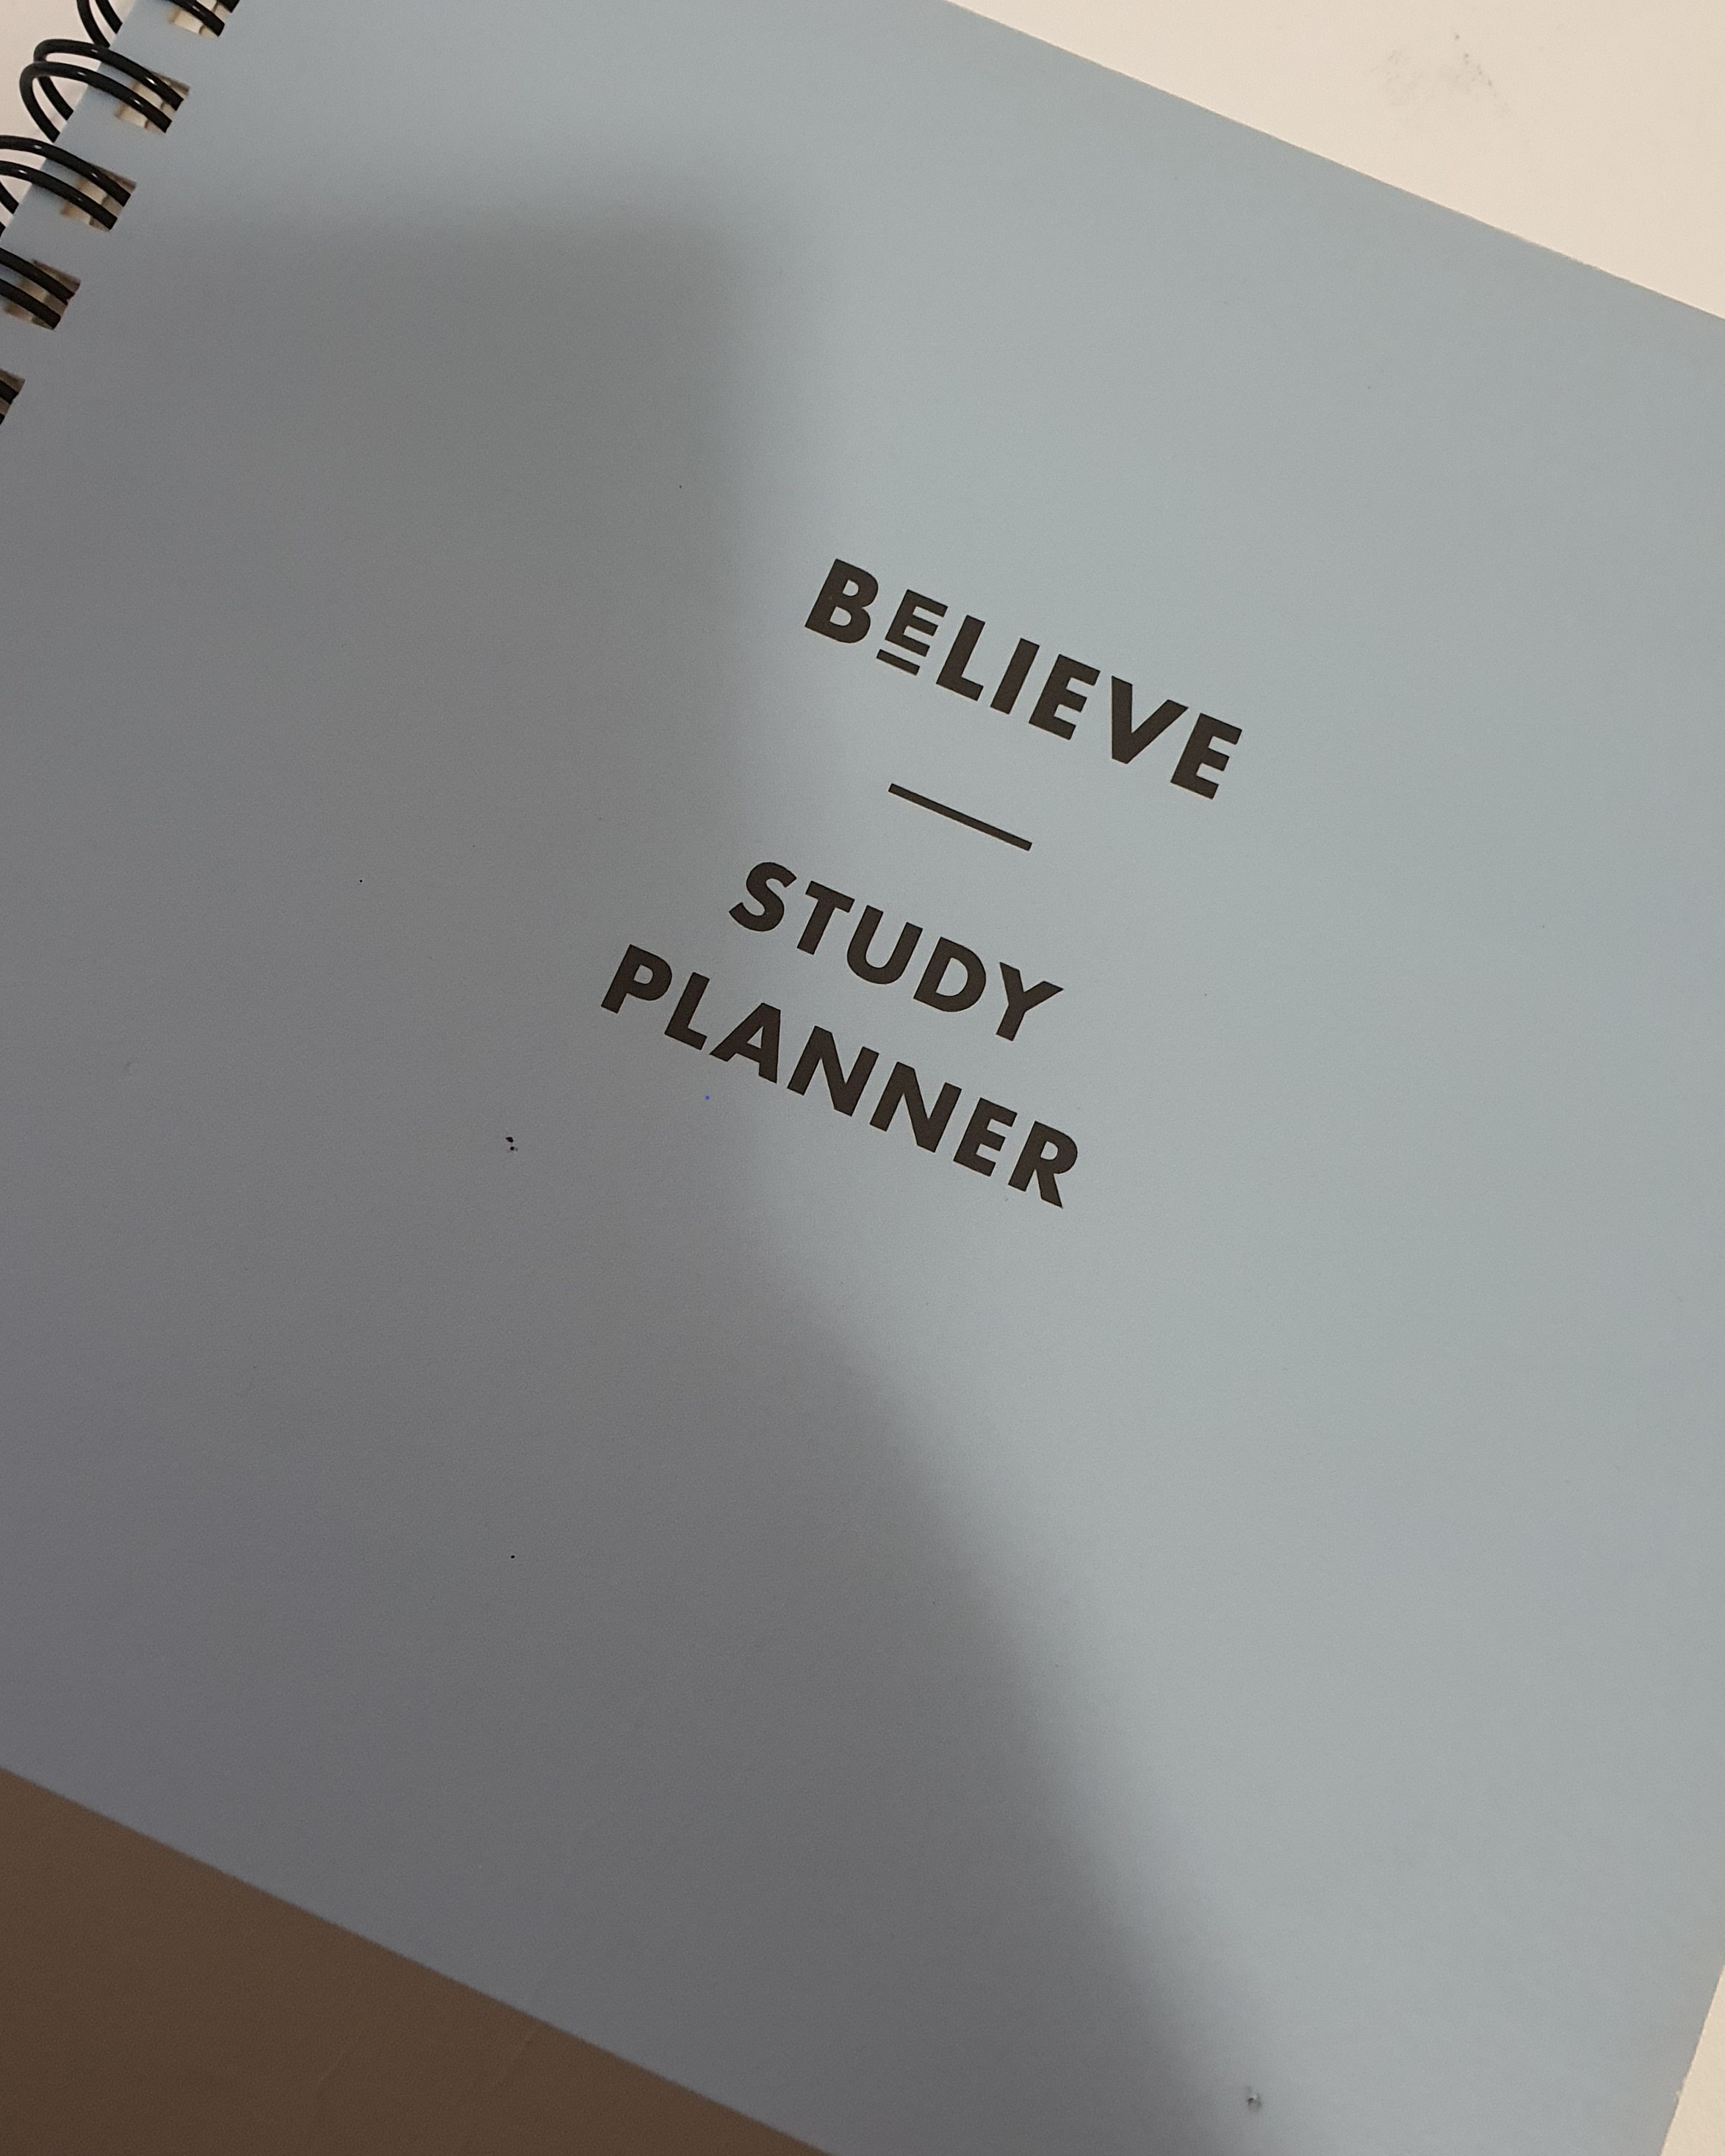 [photo of study planner, Photo Credit to Yujin Son]